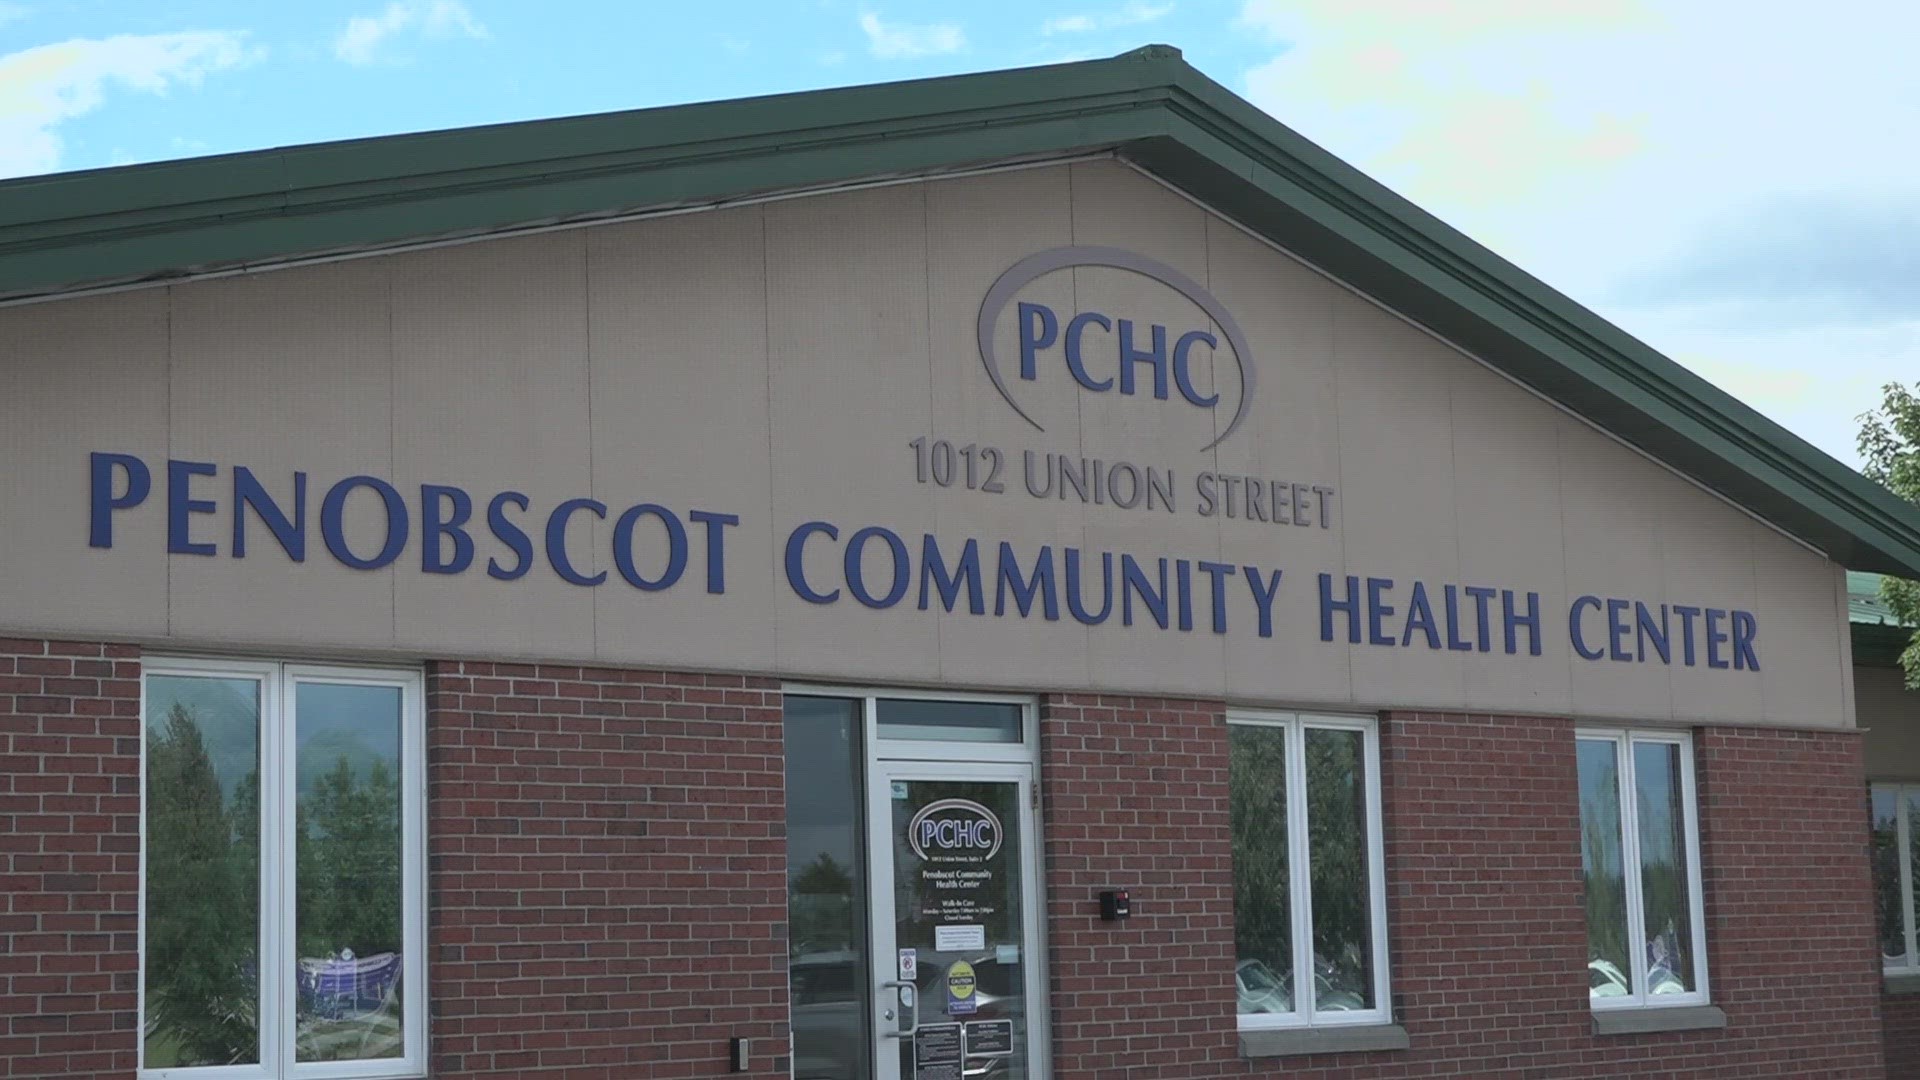 Bangor, Brewer, and Belfast are on the list of communities to receive expanded PCHC services later this year.